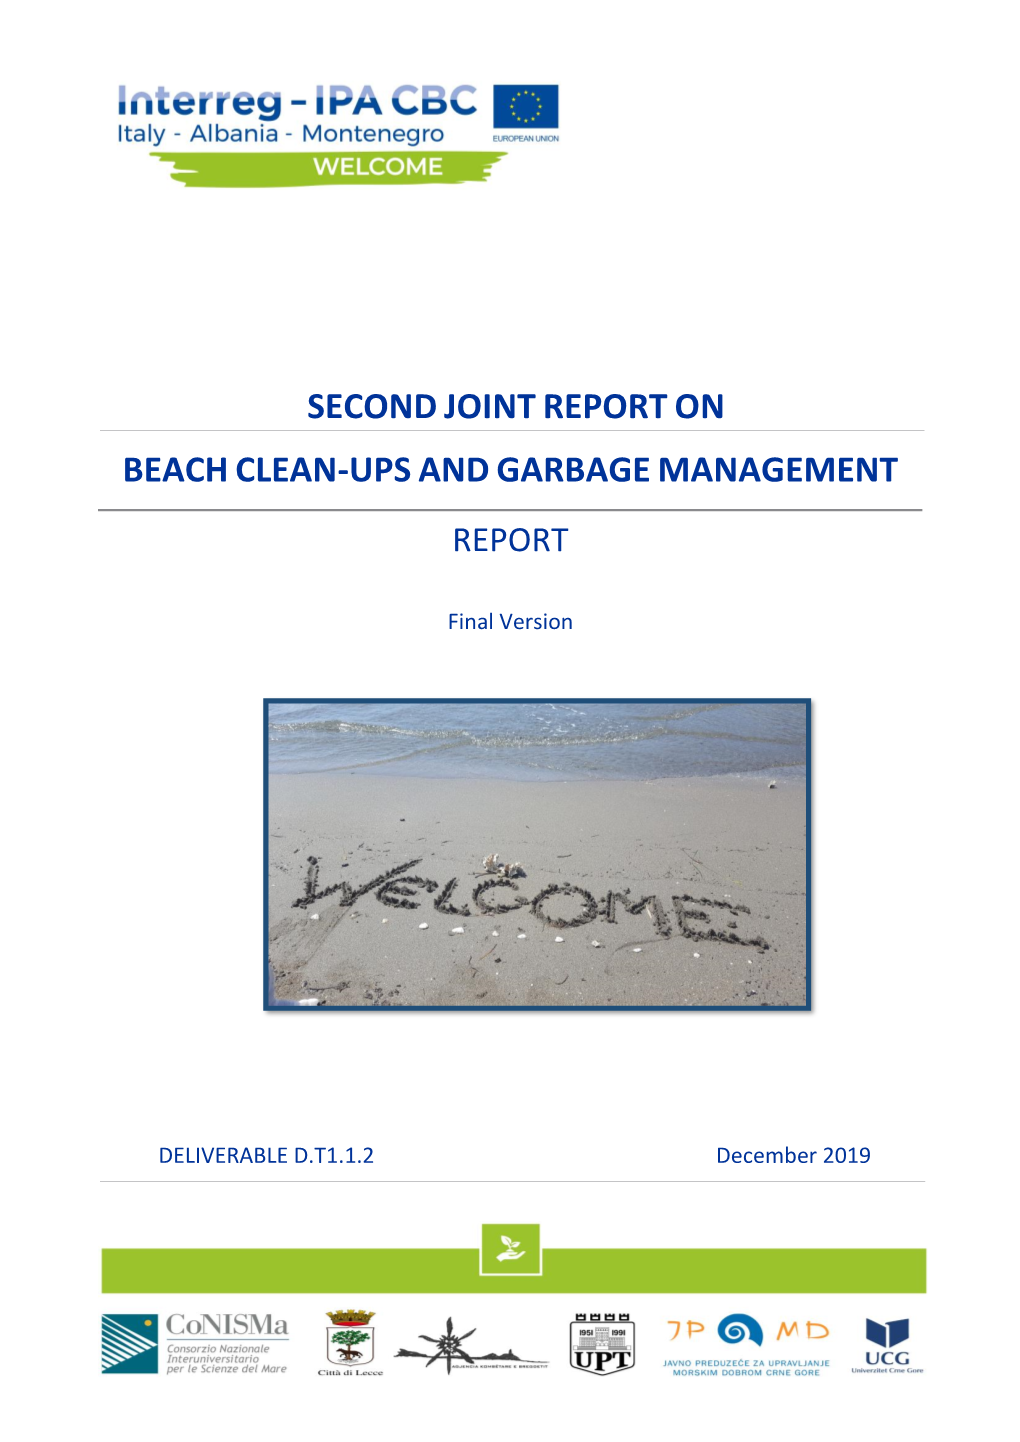 Second Joint Report on Beach Clean-Ups and Garbage Management Report